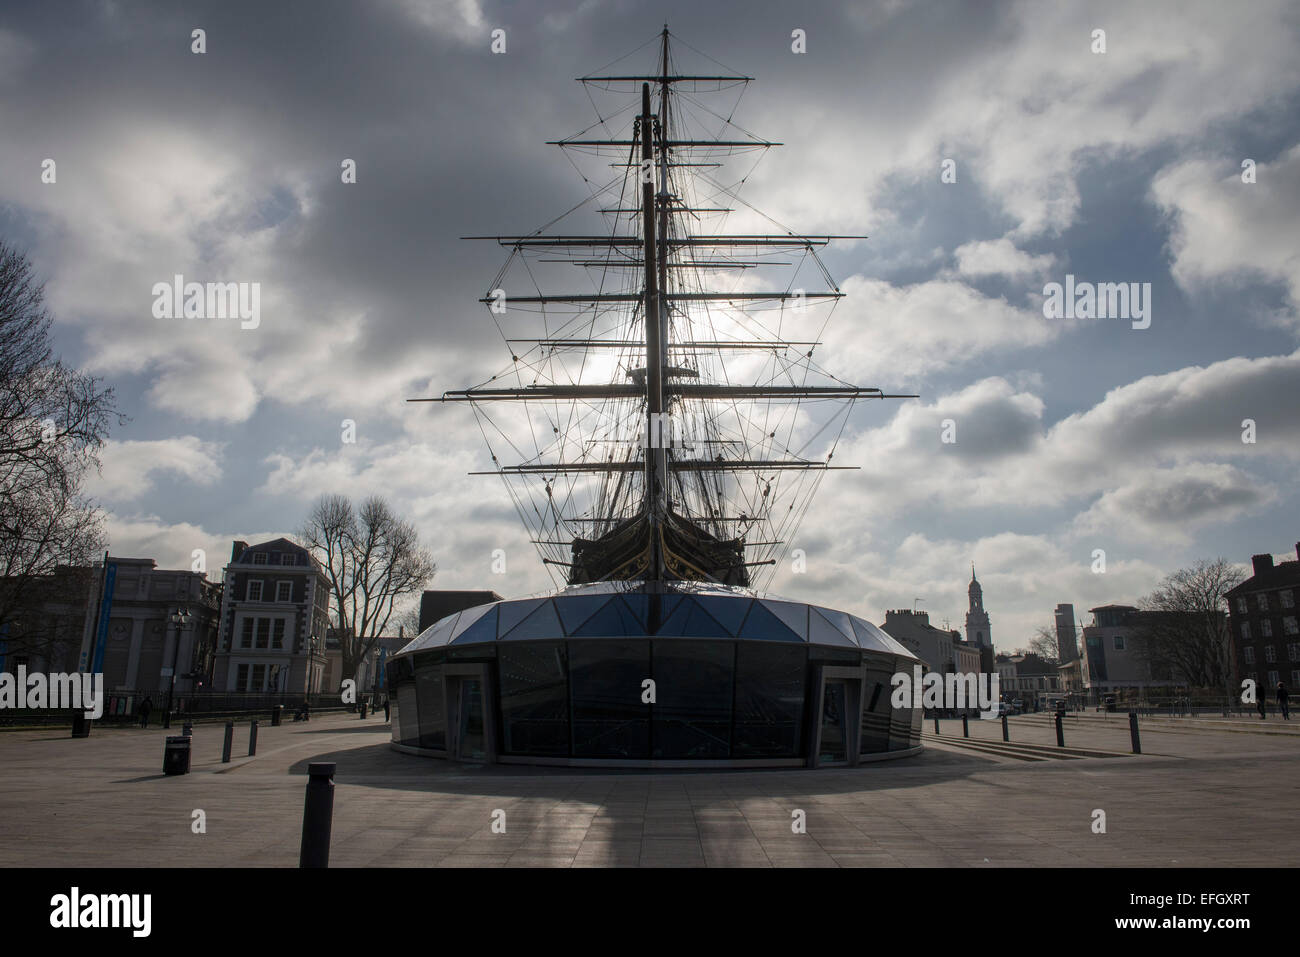 Front view of the famous tea clipper the Cutty Sark at Greenwich, London, UK. February 2015 Stock Photo